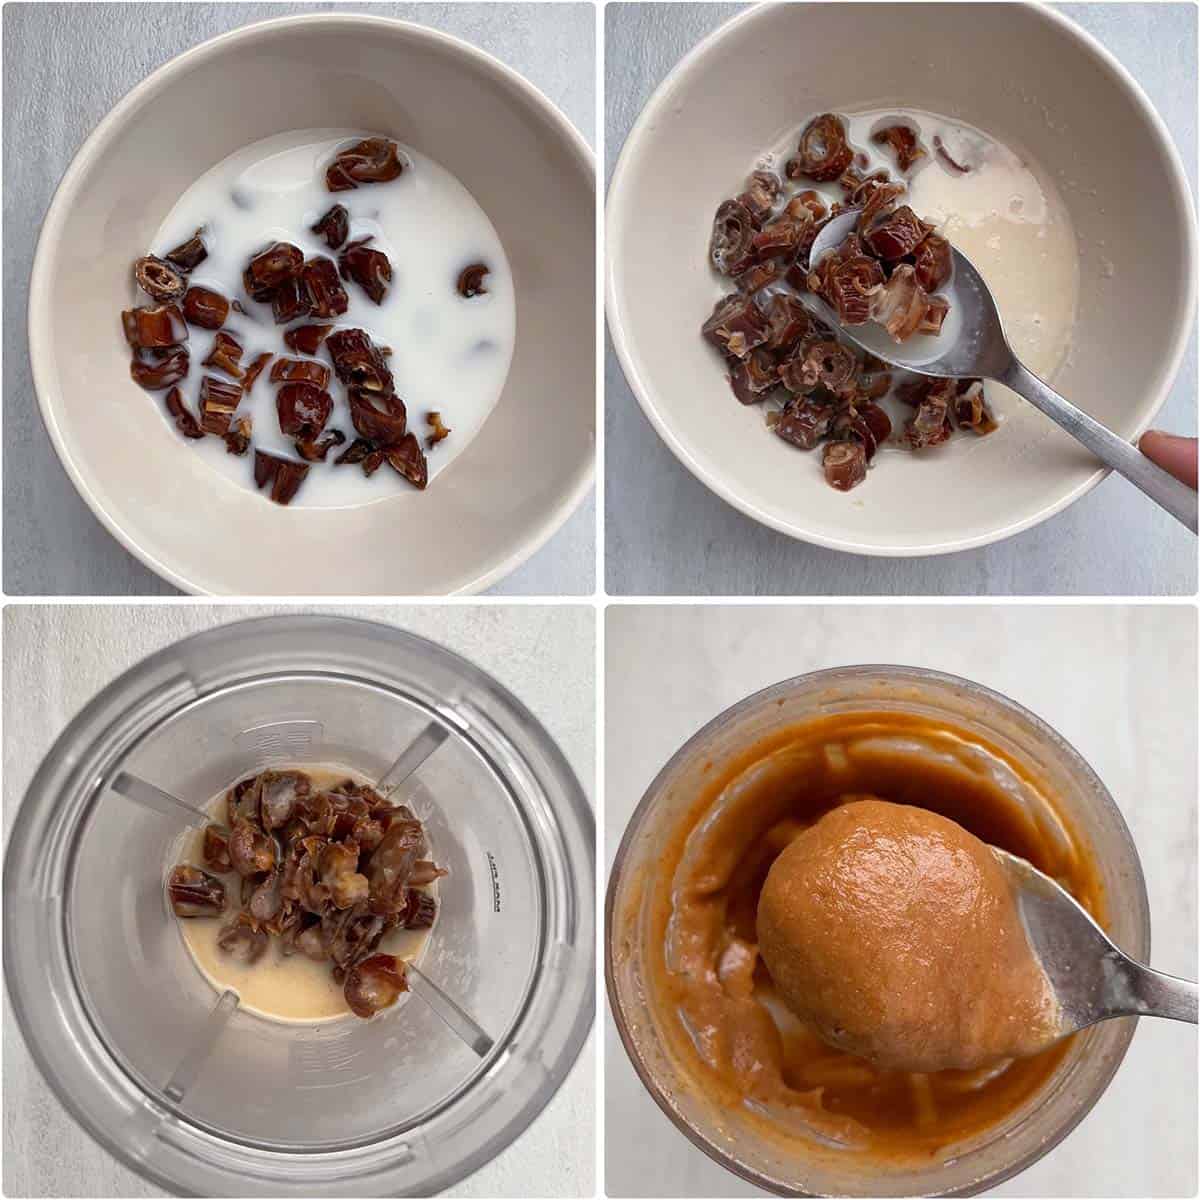 4 panel photo showing the soaking of dates in milk and grinding to a paste.